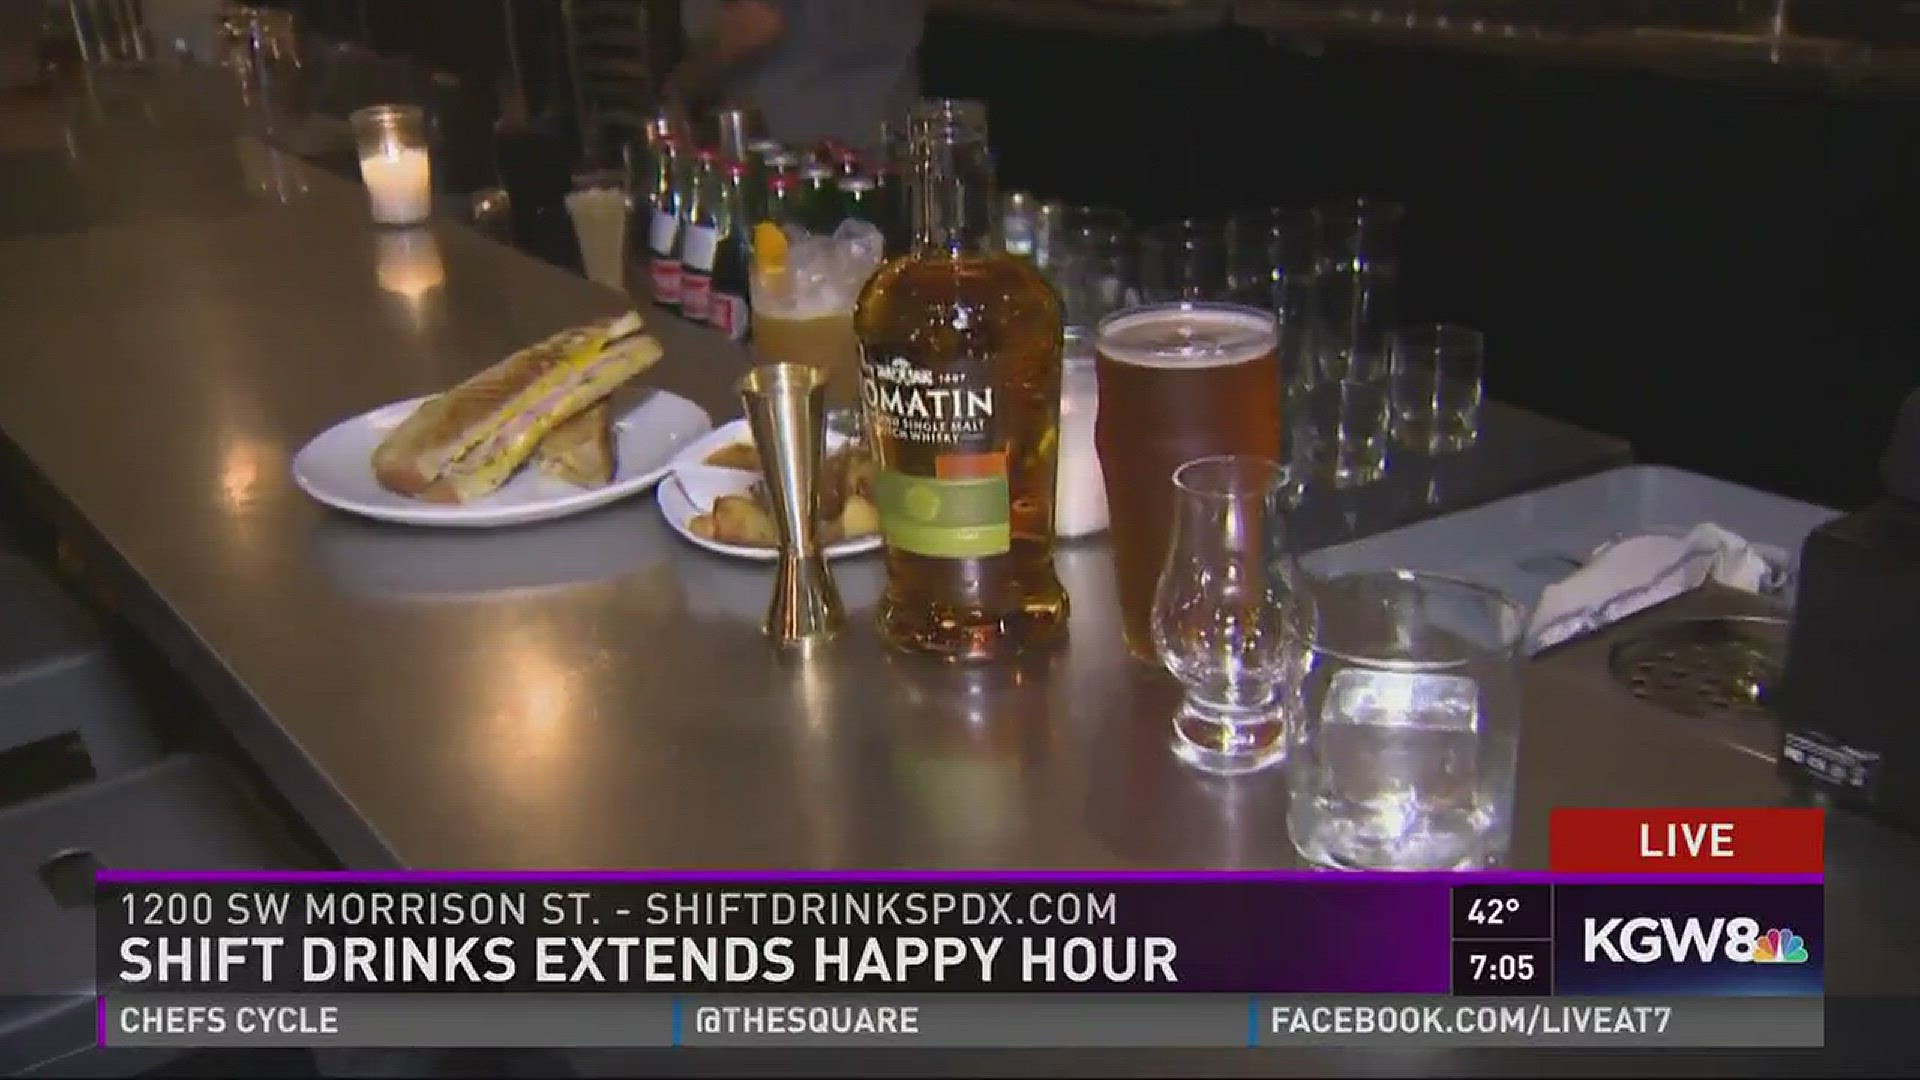 Shift Drinks Extends Happy Hour